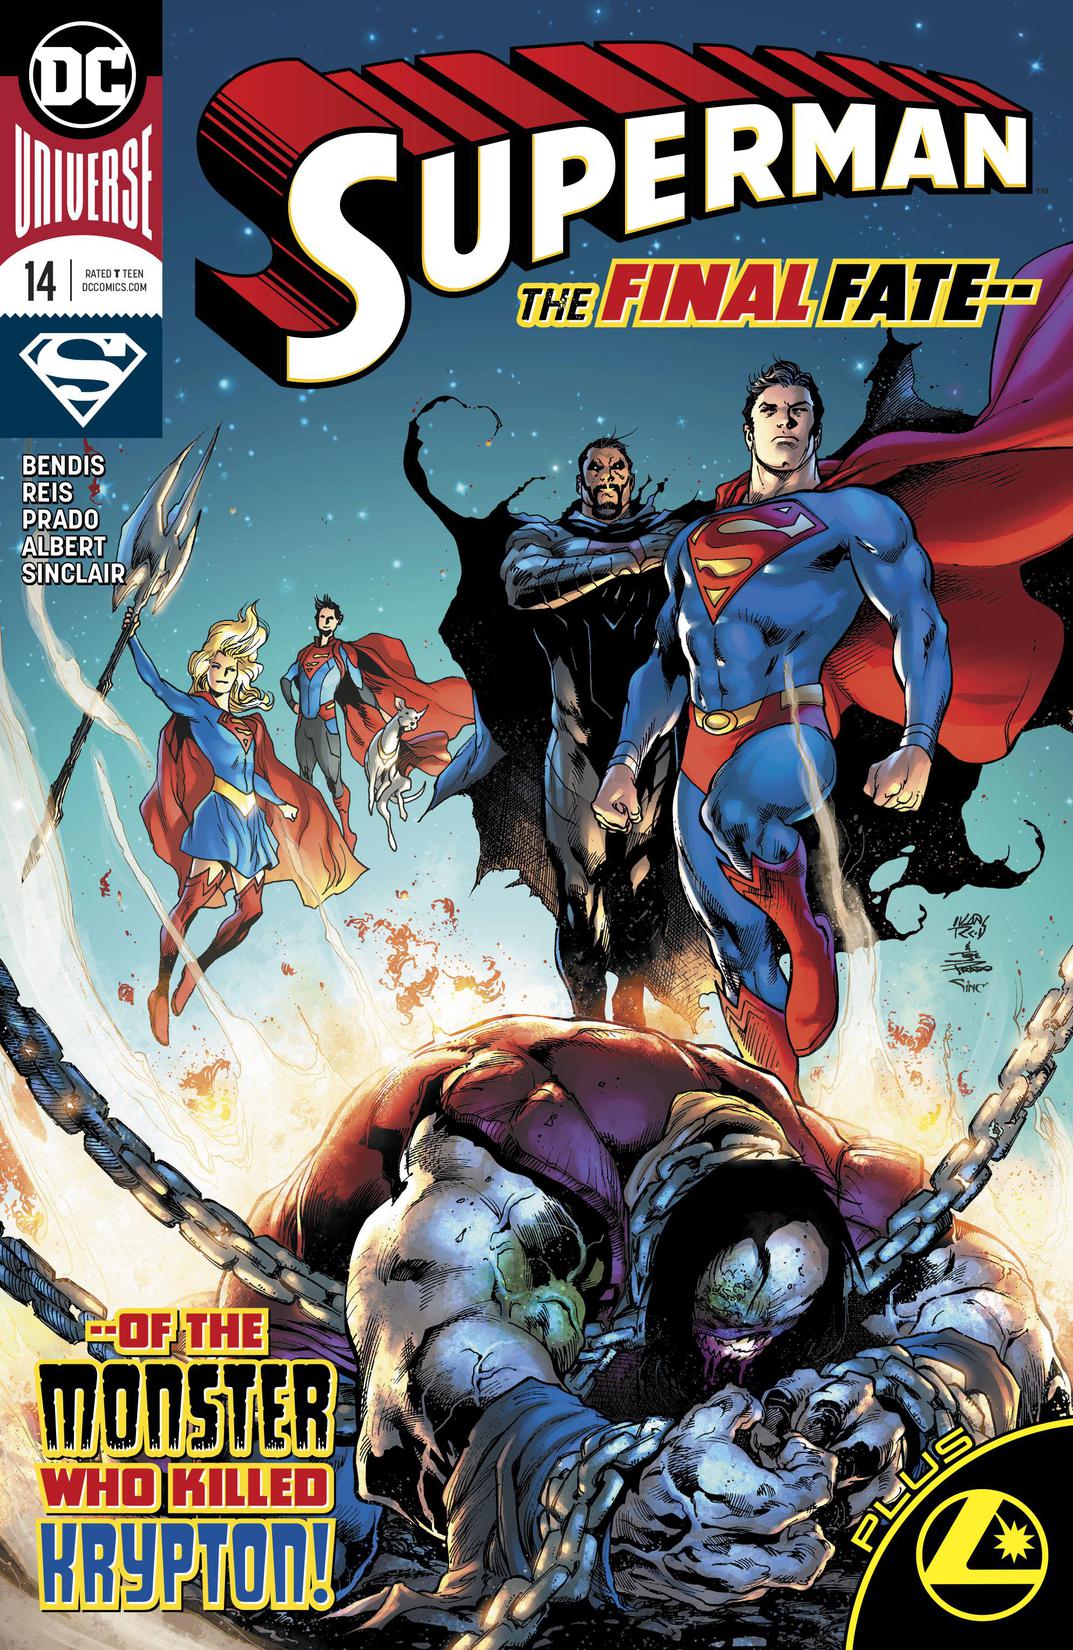 Superman (2018-) #14 preview images